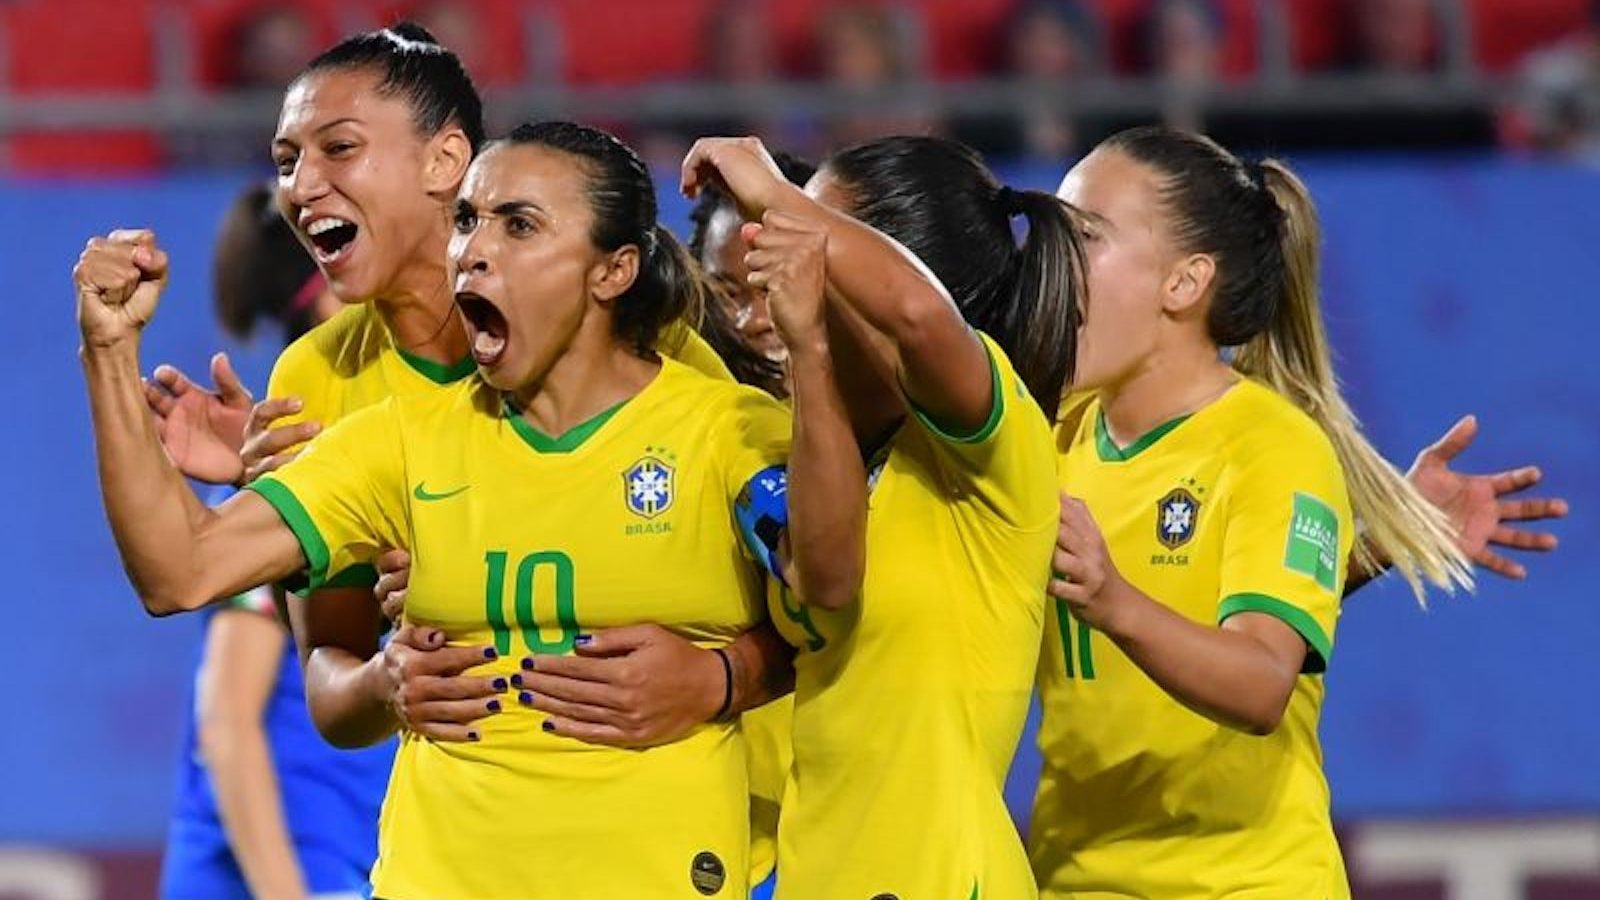 Brazil’s Marta is poised to make history in her sixth World Cup